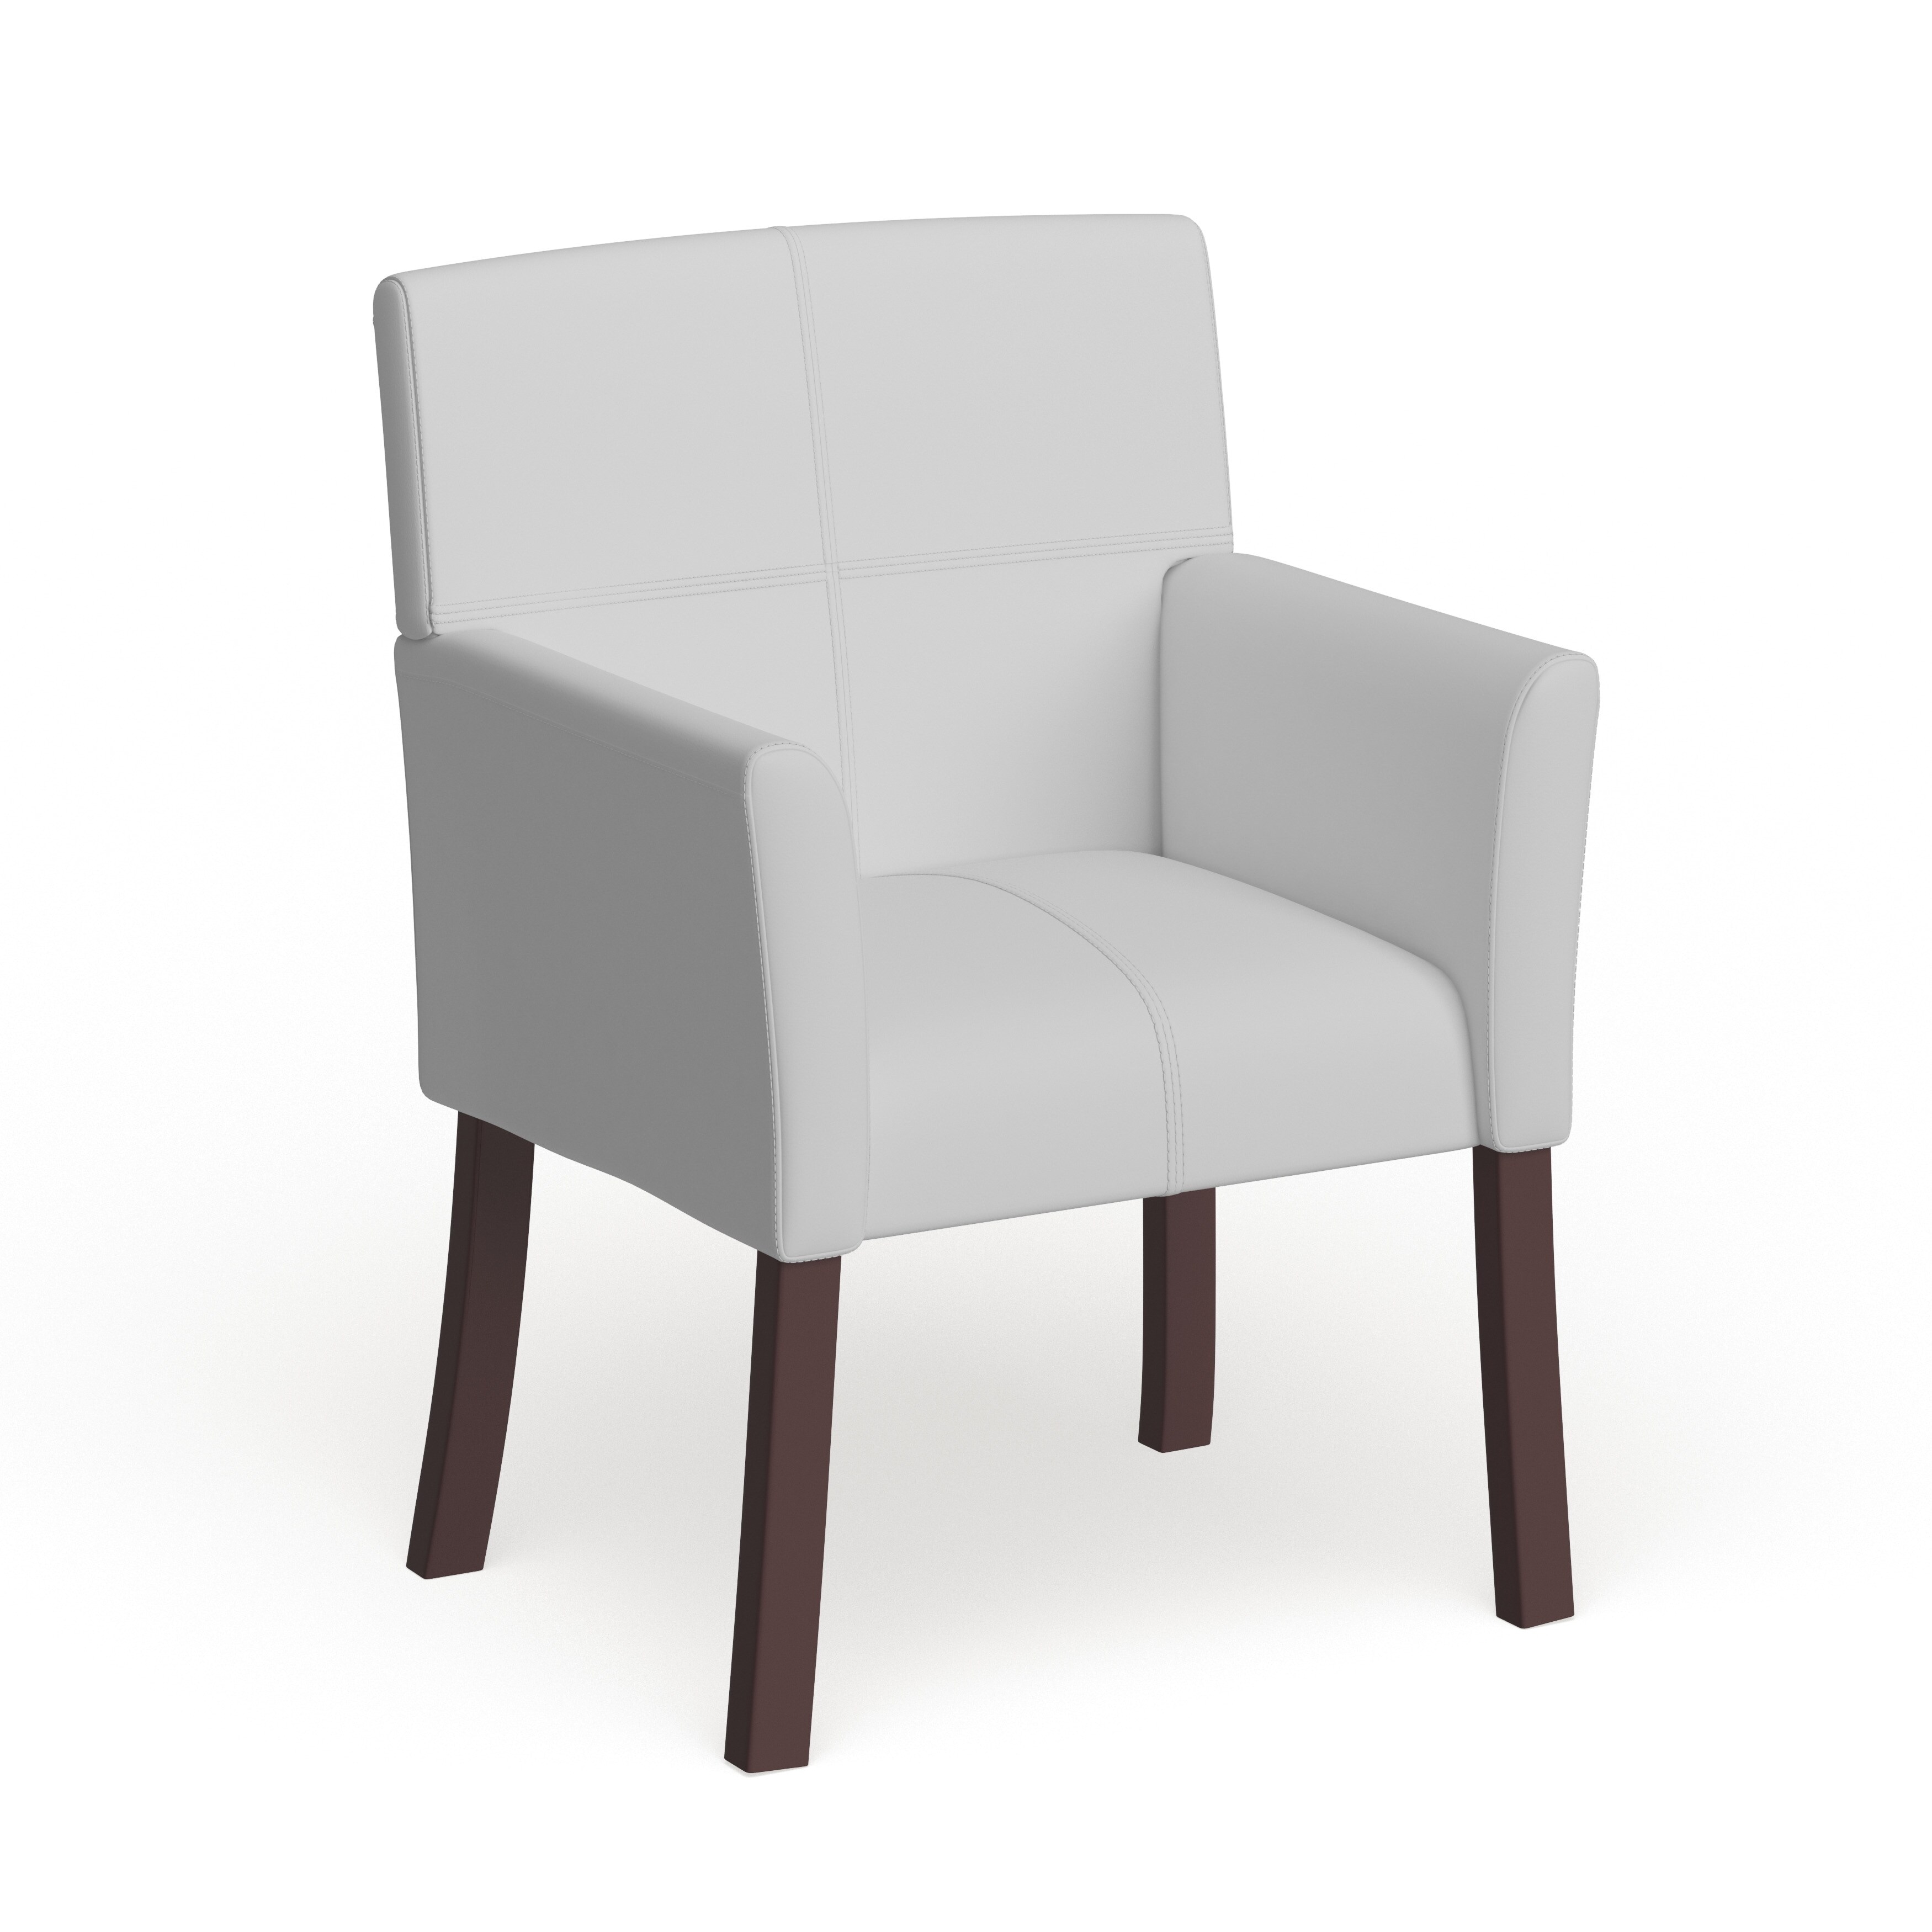 LeatherSoft Executive Side Reception Chair with Mahogany Legs